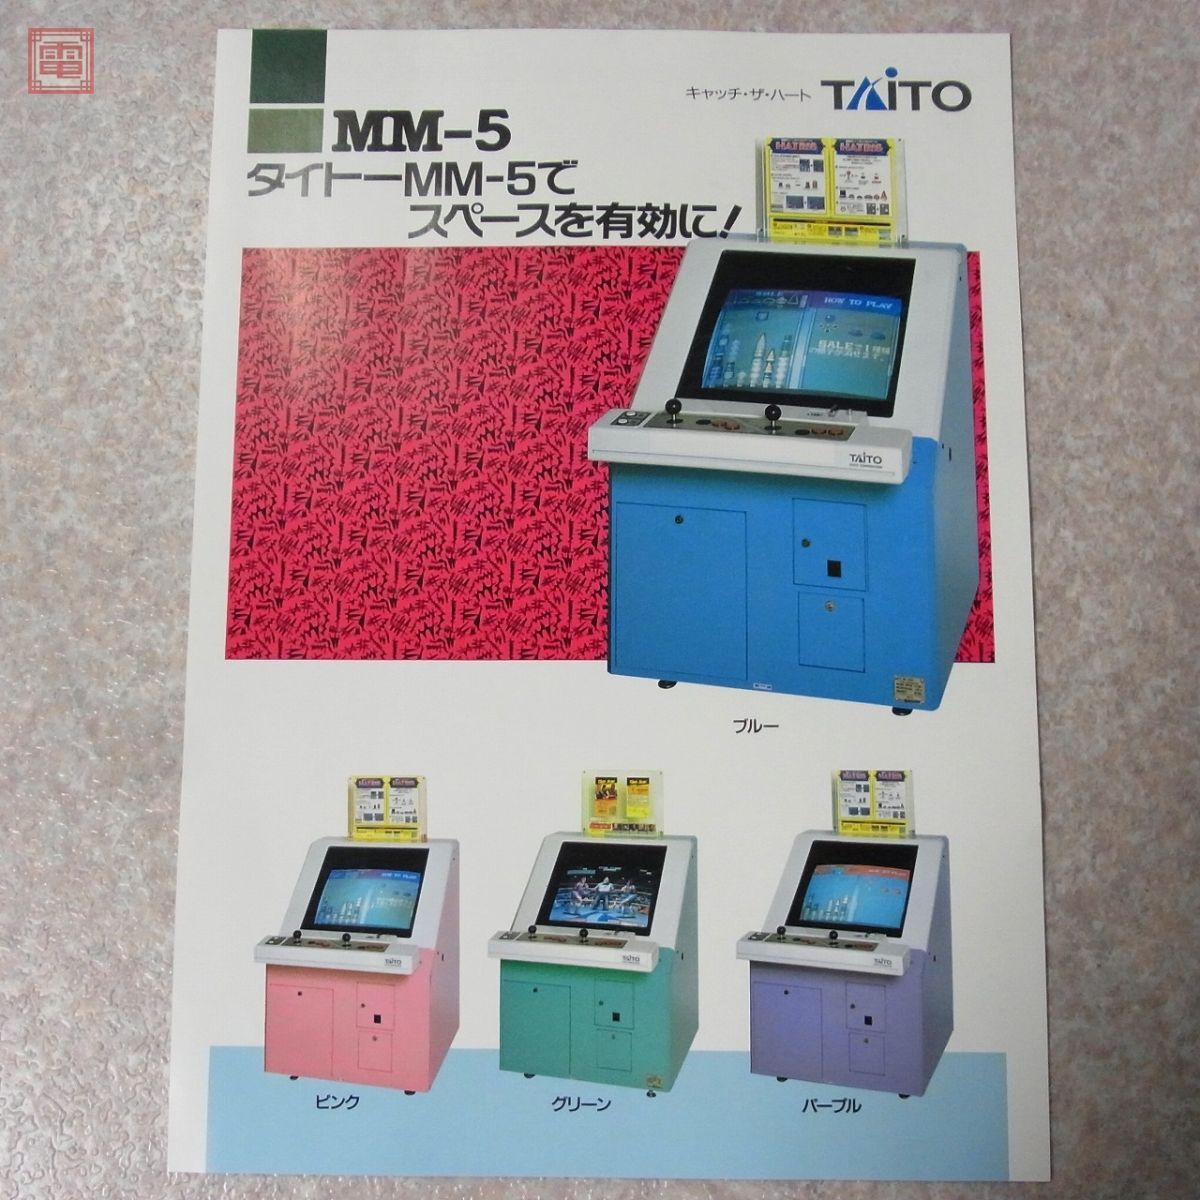  leaflet tight -/TAITO MM-5 case D3-BOS( development middle ) 2 kind set Flyer [PP